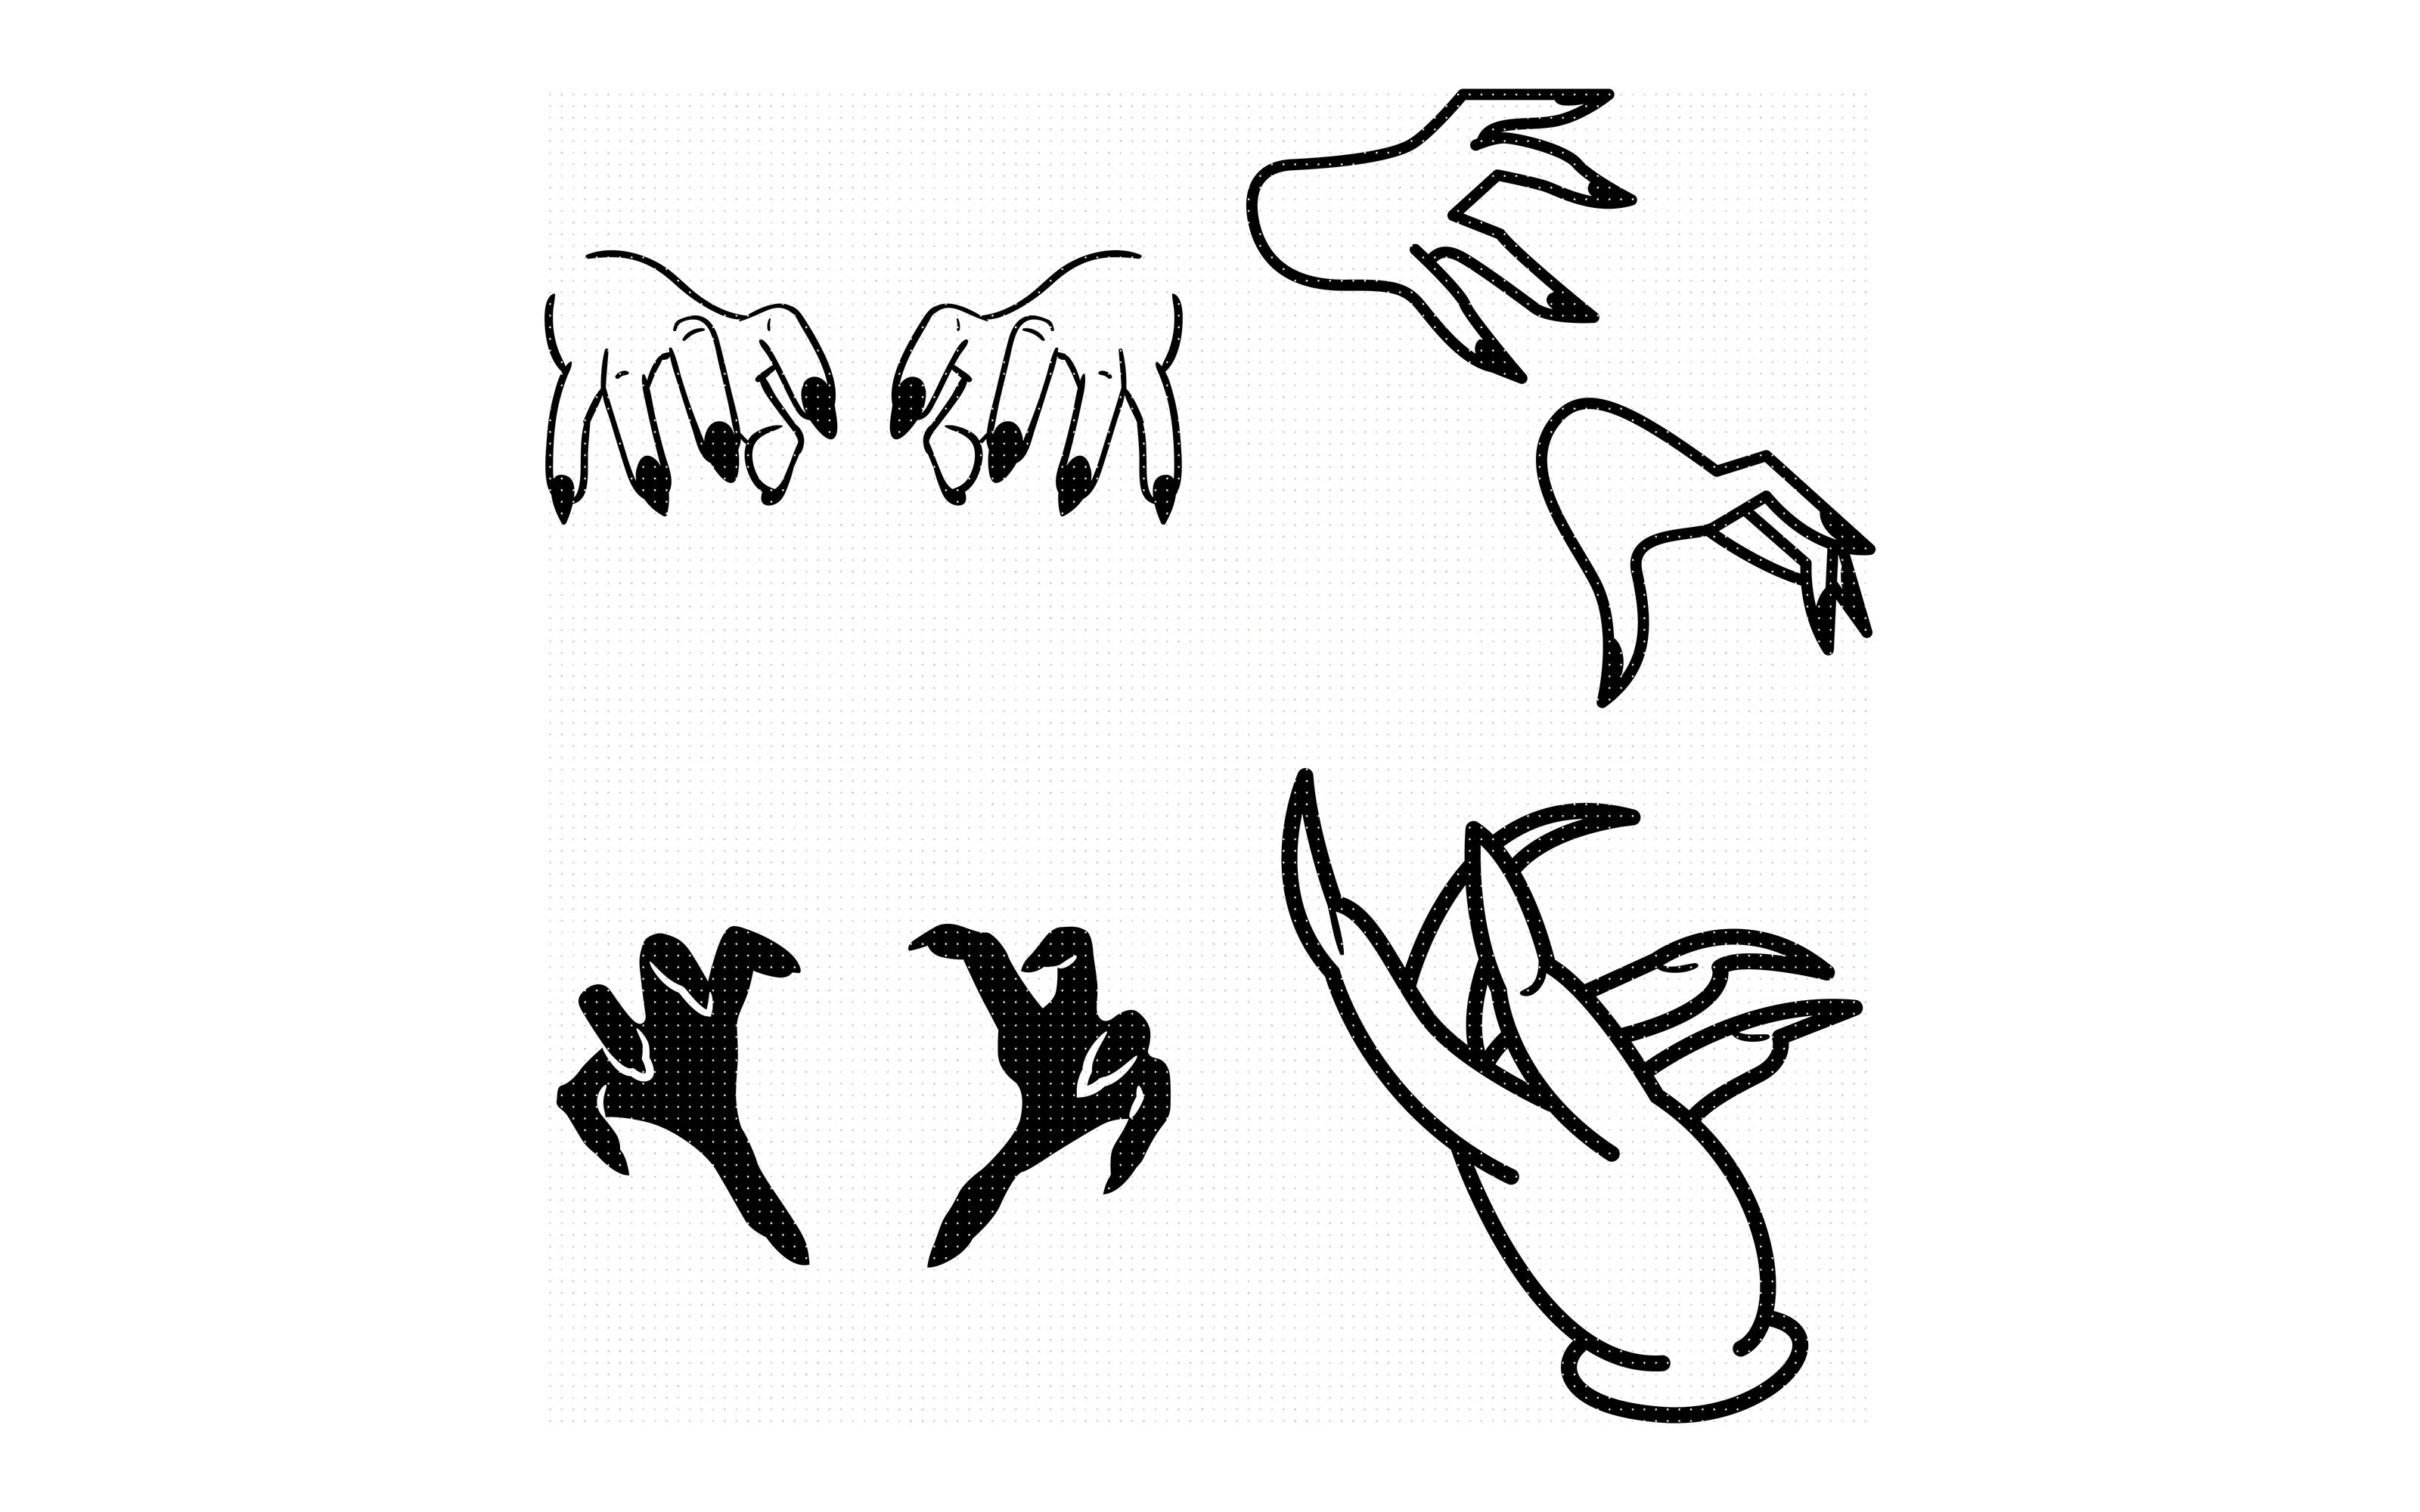 ori 3654283 qkeqluvmpylw7y2sr0sshwl1uyo4hl3963ja5ali witch nails long nails and hand svg dxf vector eps clipart